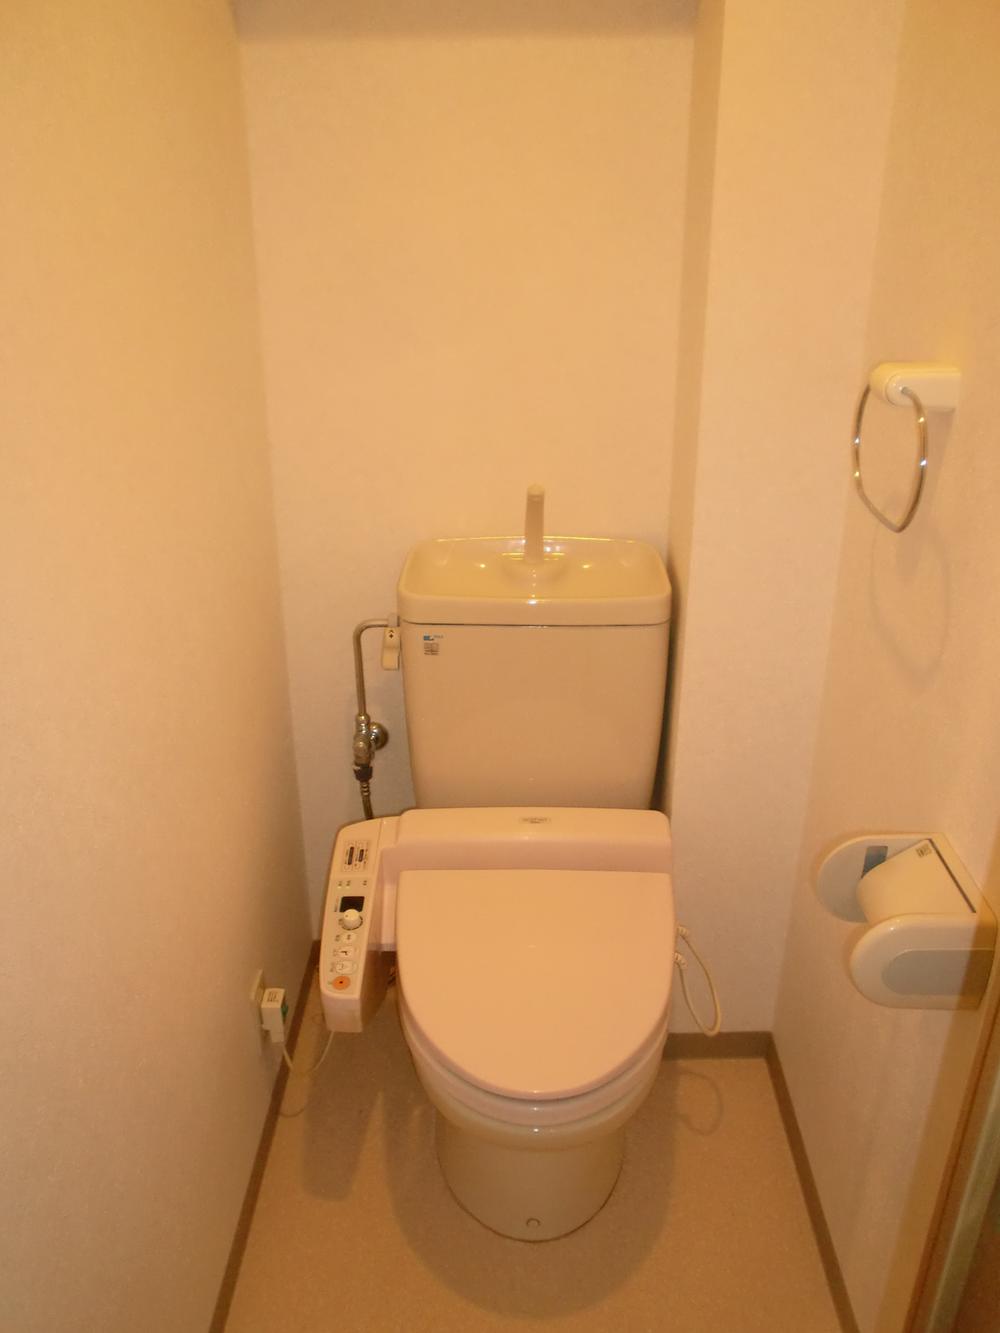 Toilet. Toilet with cleanliness. Towel over also equipped.